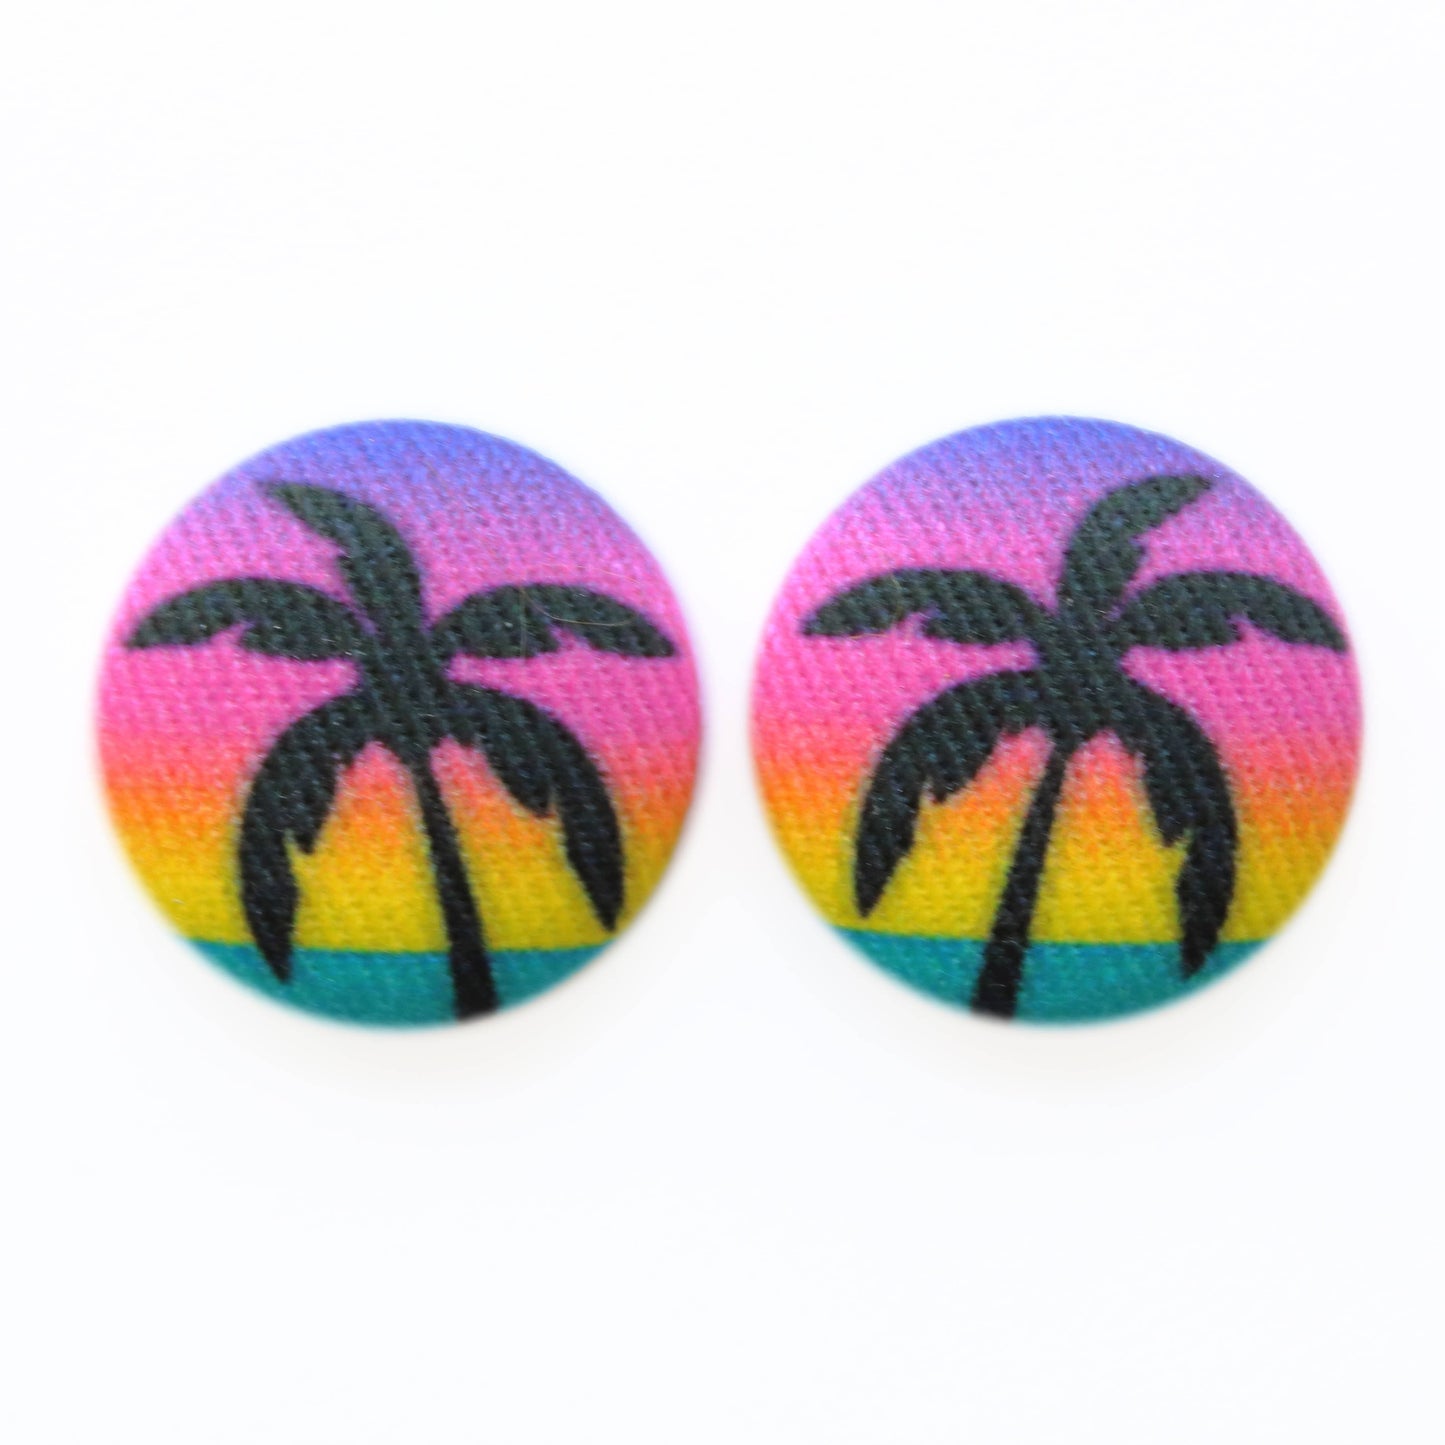 Vacation Fabric button Stud Earrings